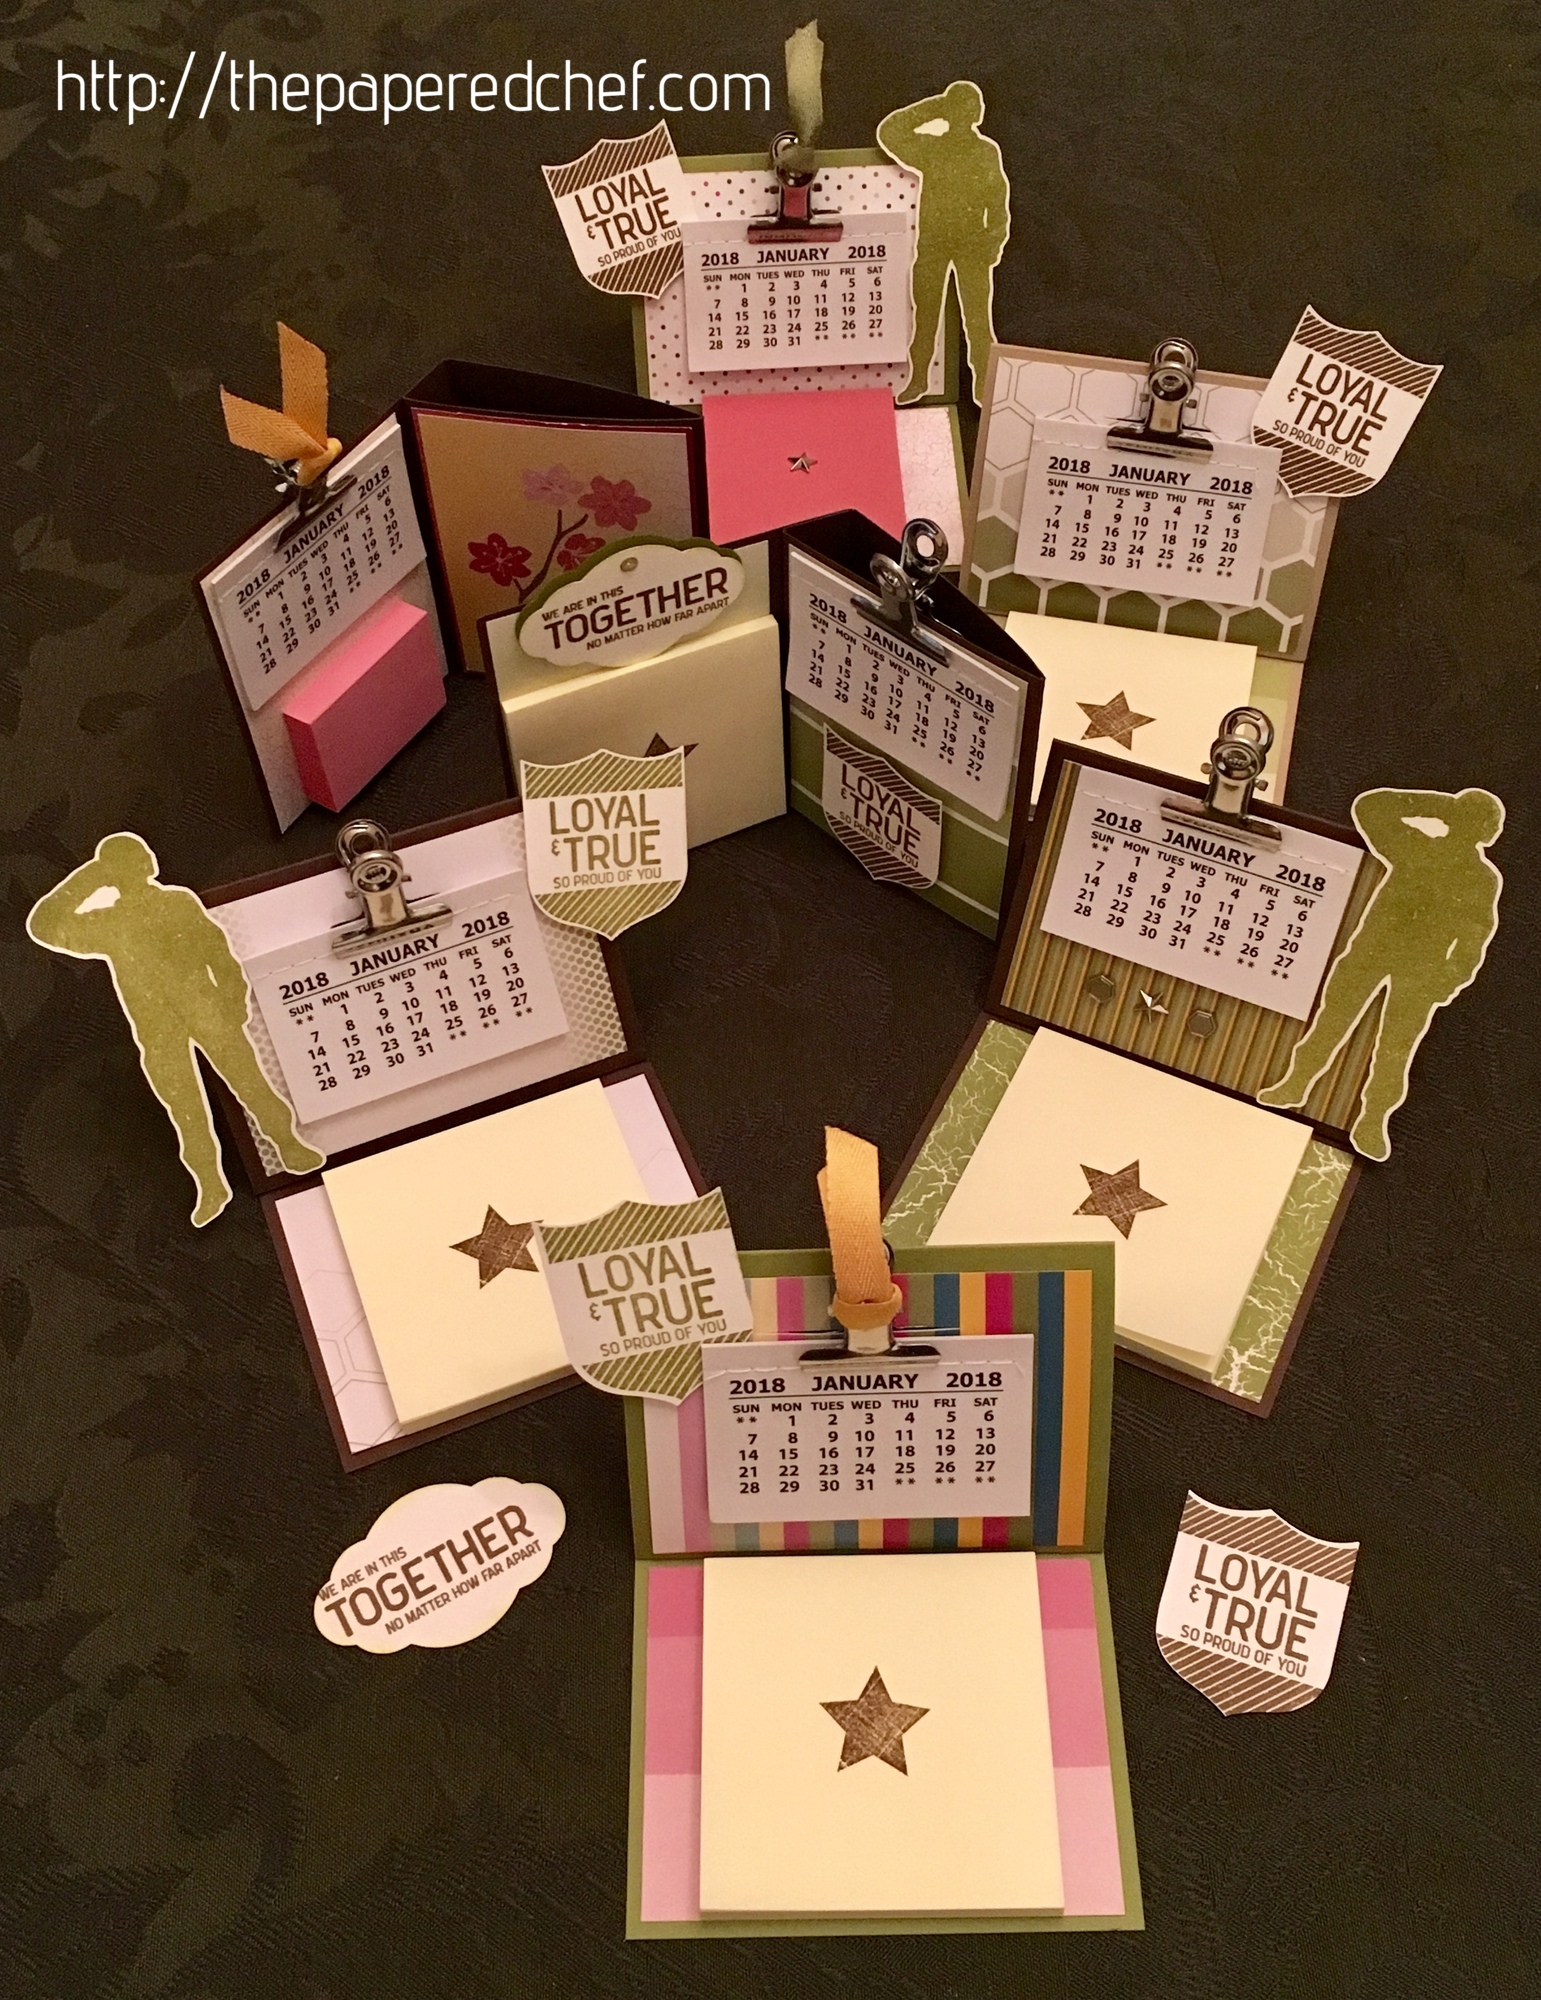 Calendars for Troops - Loyal & True by Stampin’ Up